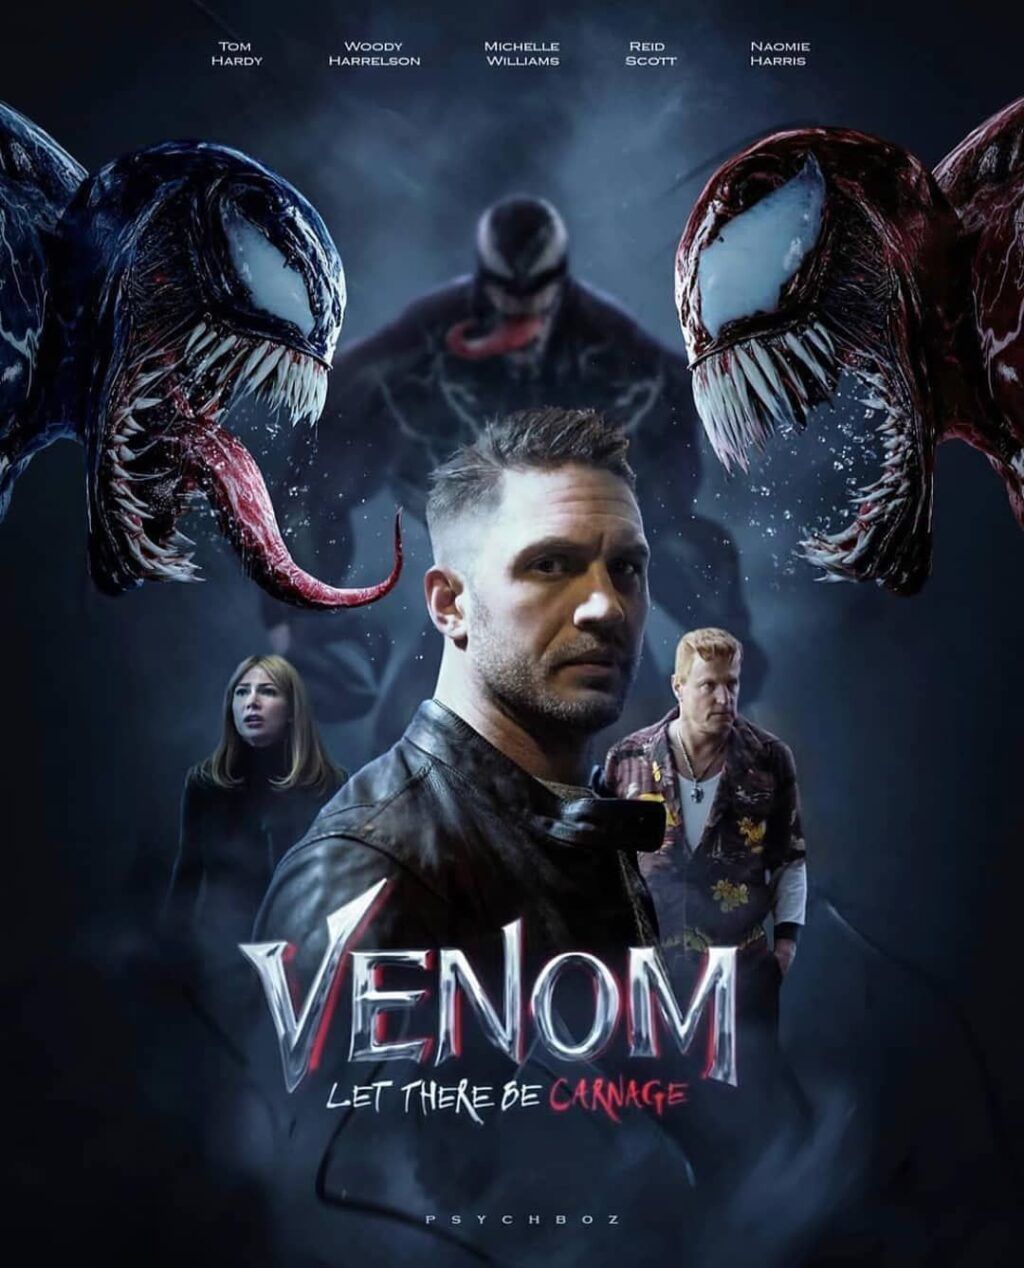 Venom Let There Be Carnage Movie (2021) Cast. Video Songs. Release Date and Mp3